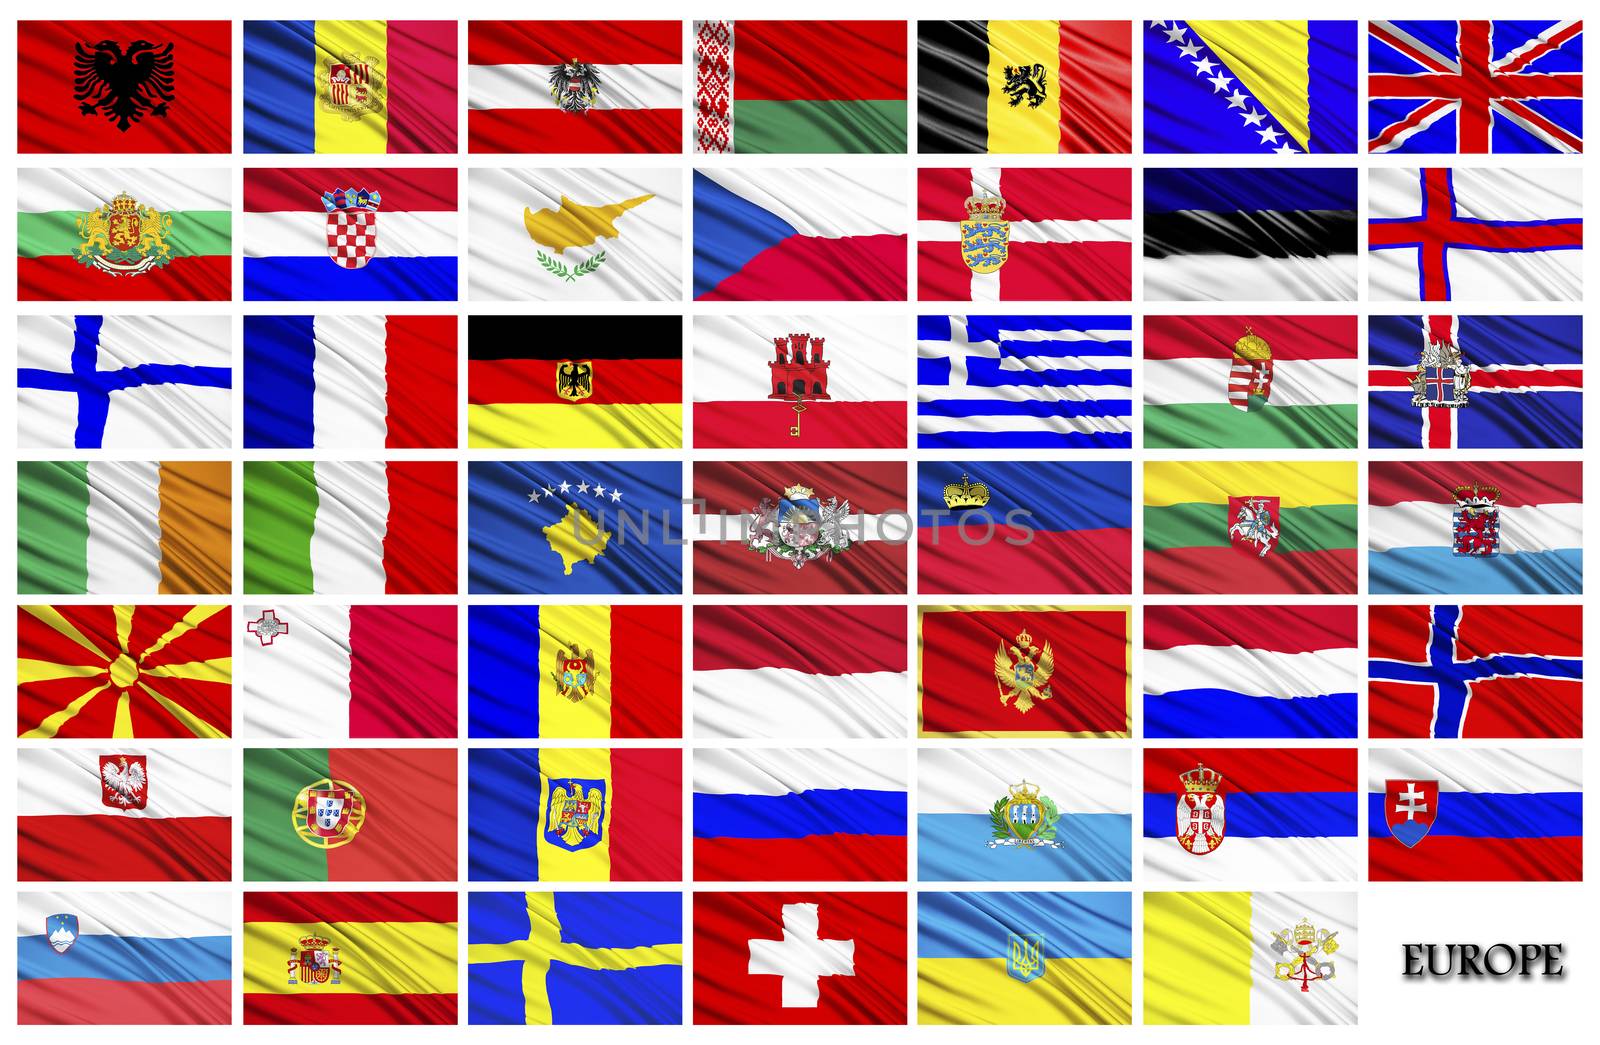 Collage of the flags of the countries of Europe, located on a white background in alphabetical order